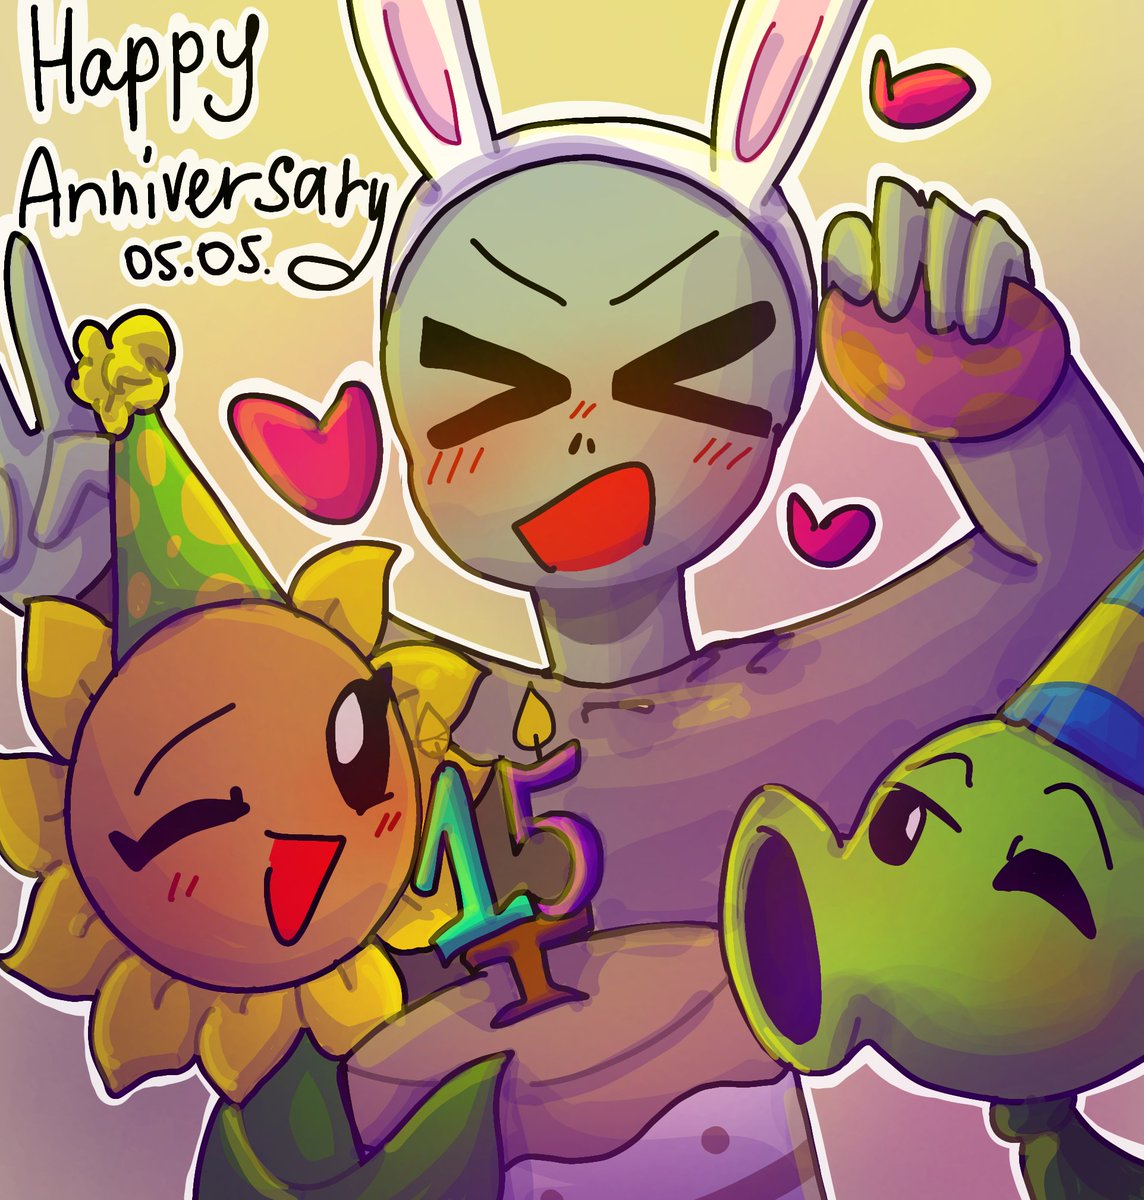 Happy 15th Anniversary of the Plants vs. Zombies game!! 🌱🆚🧟‍♂️

And today, as an Orthodox Christian, coincides with Easter Day!

#Pvz #pvzfanart #pvz2 #plantsvszombies #art #artwork